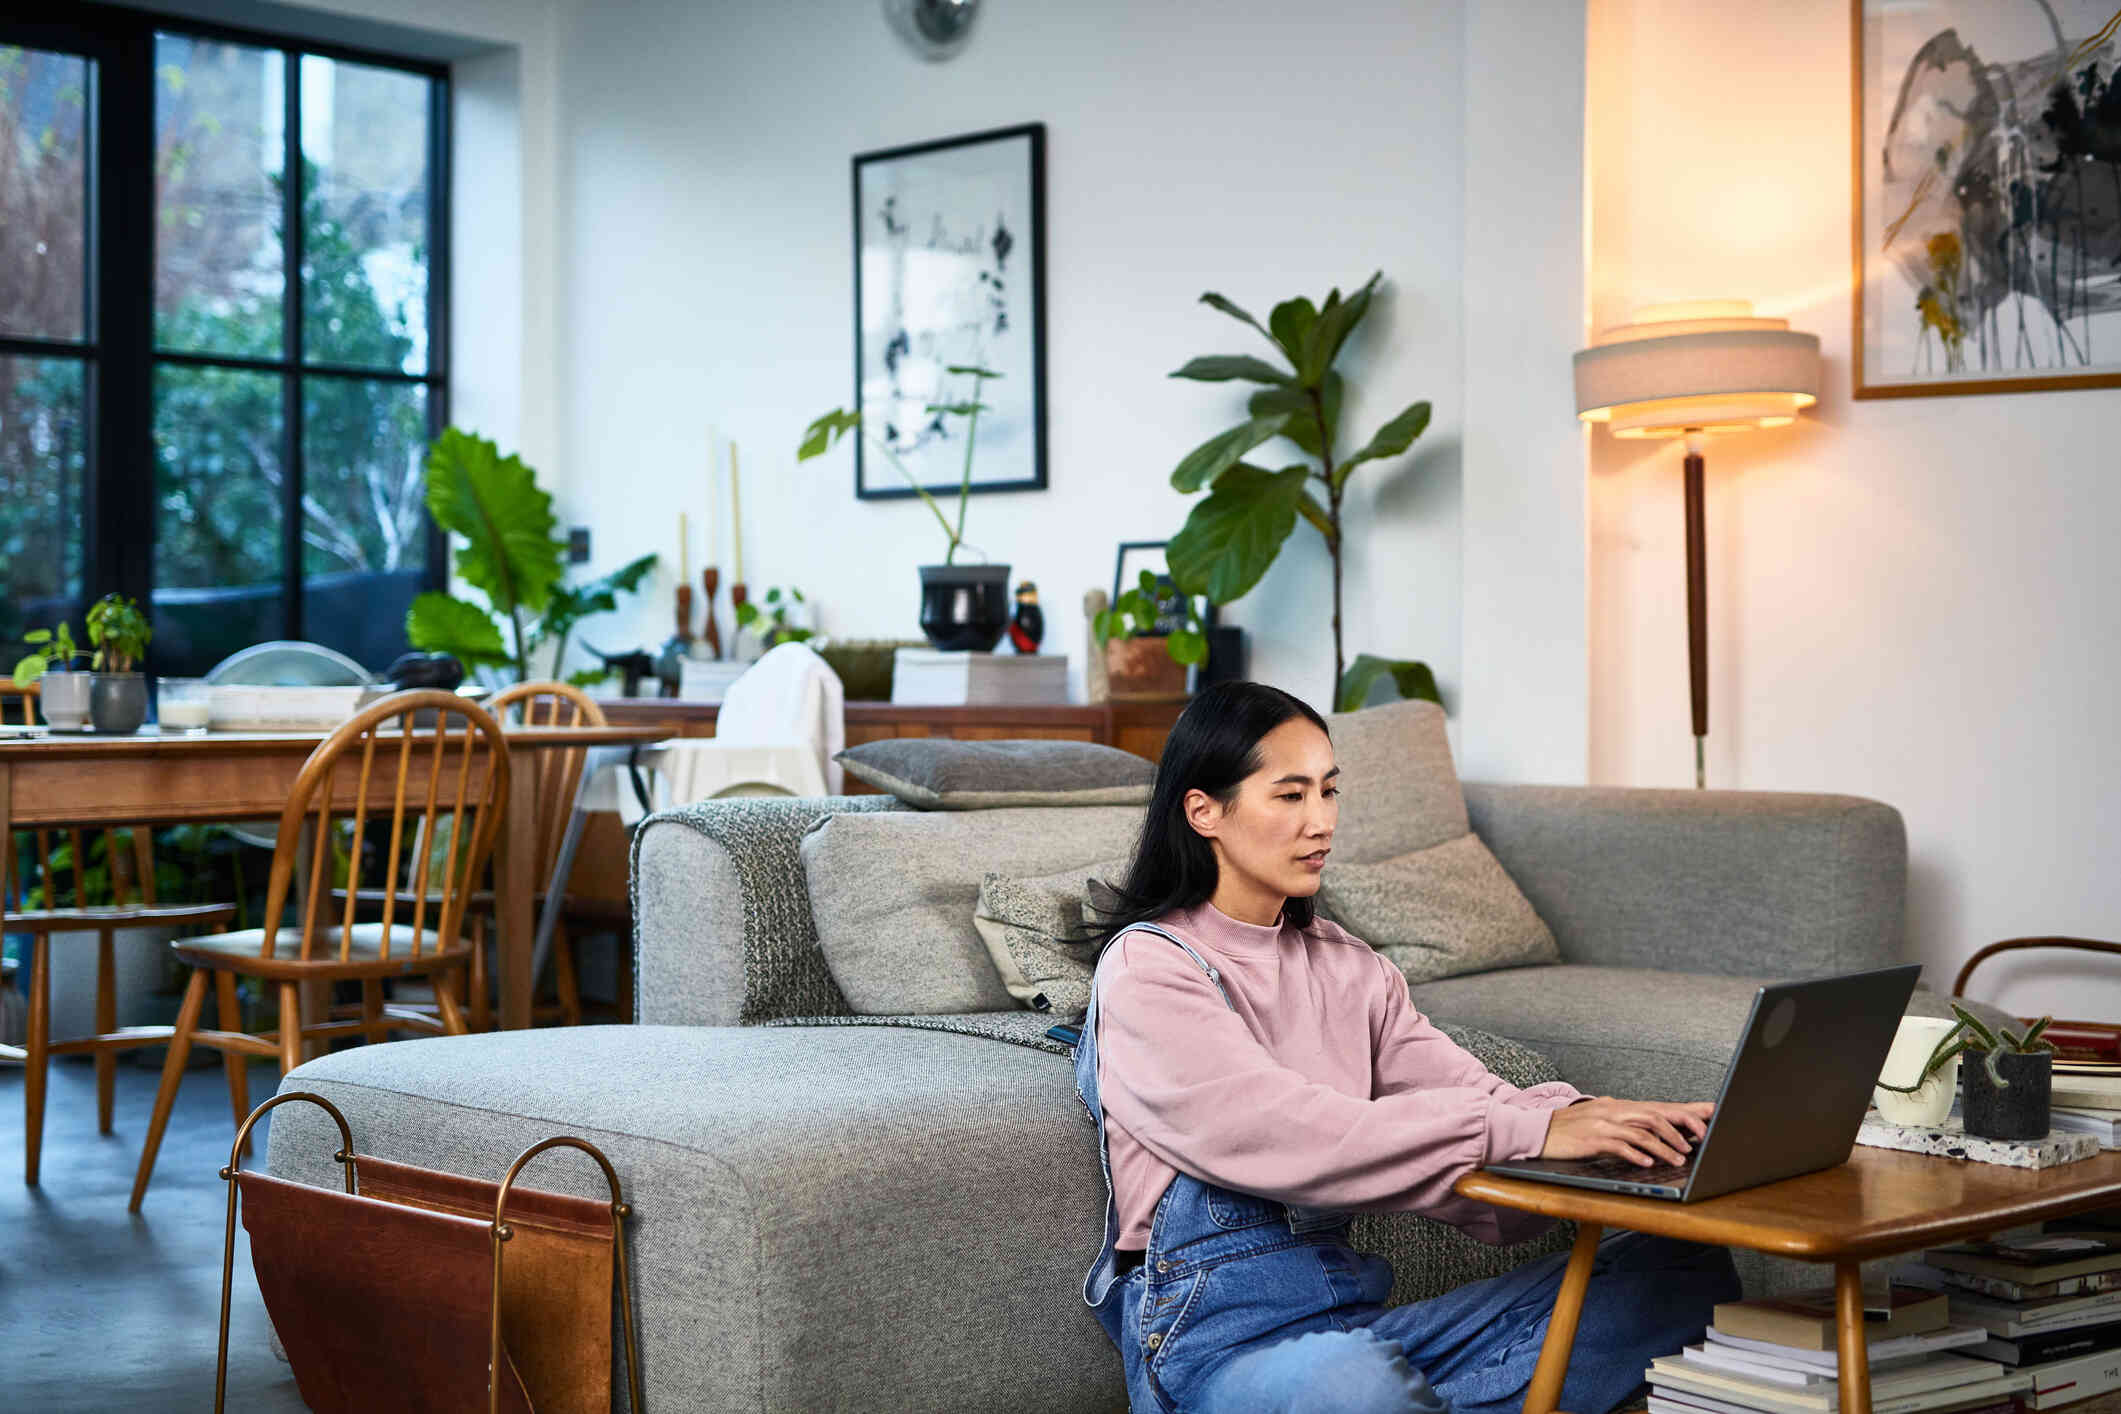 A woman in a pink sweater sits on the living room floor with her back against the couch as she types on the laptop on the coffee table infront of her.